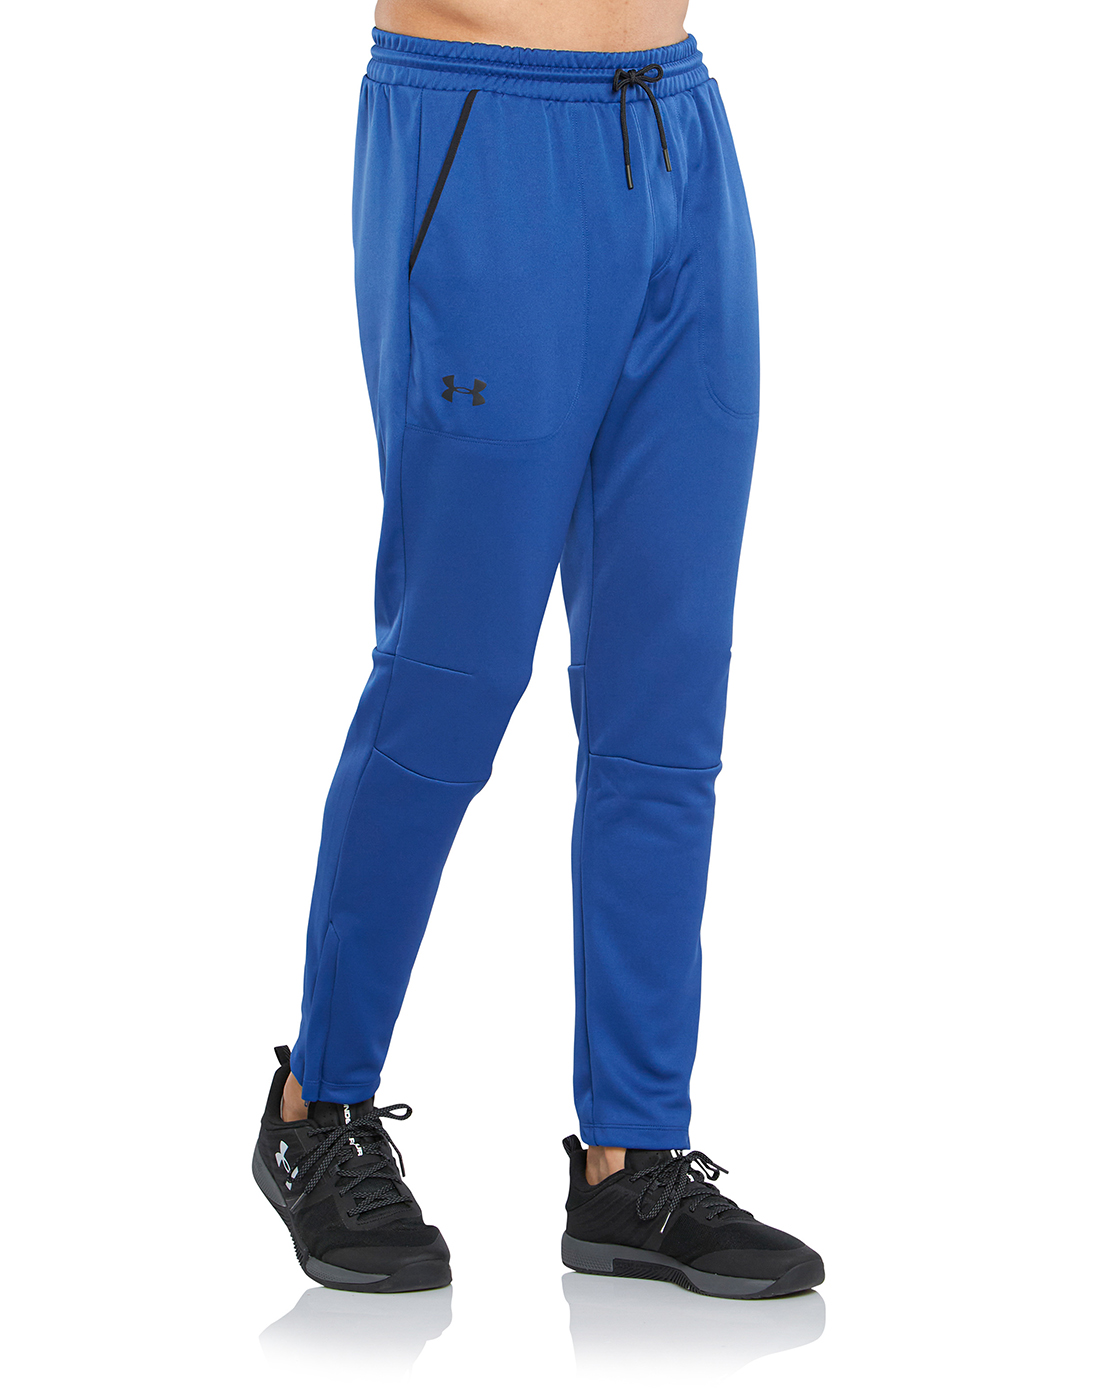 Under Armour Mens MK1 Warmup Pant - Blue | Life Style Sports IE